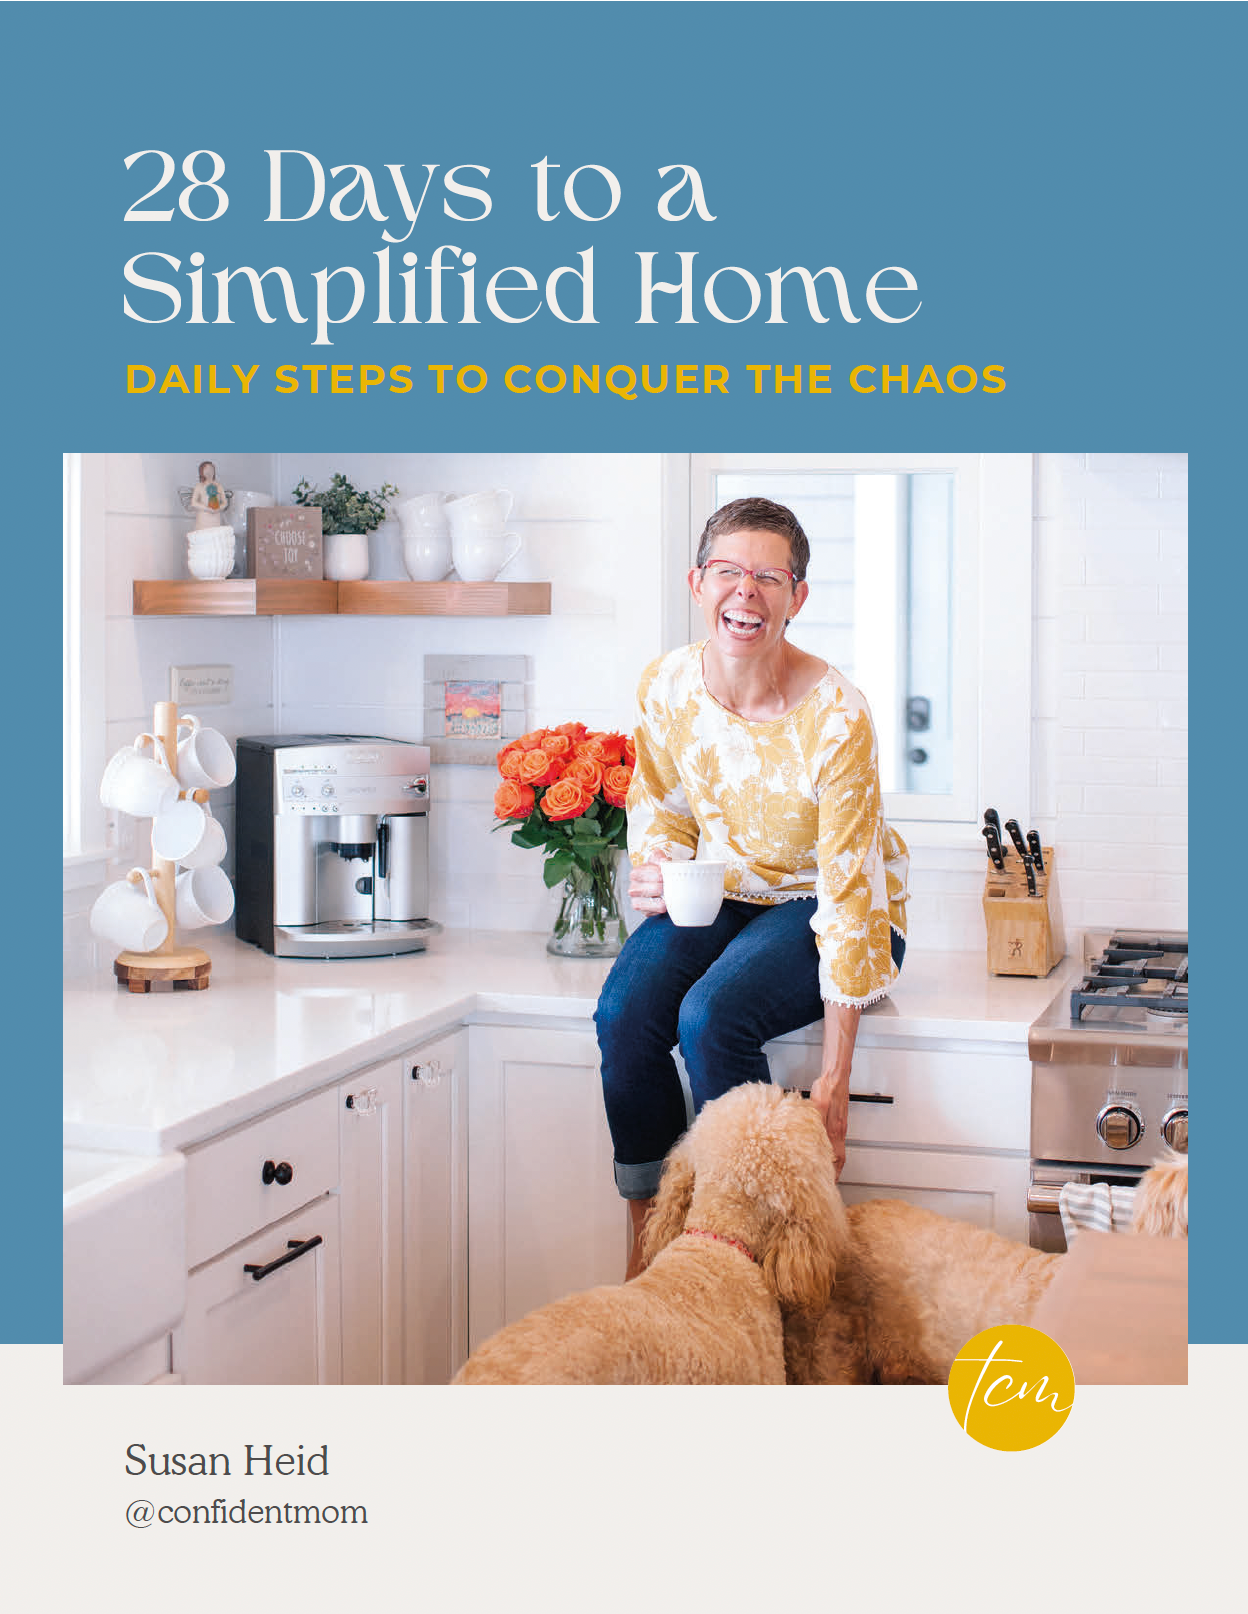 28 Days to a Simplified Home